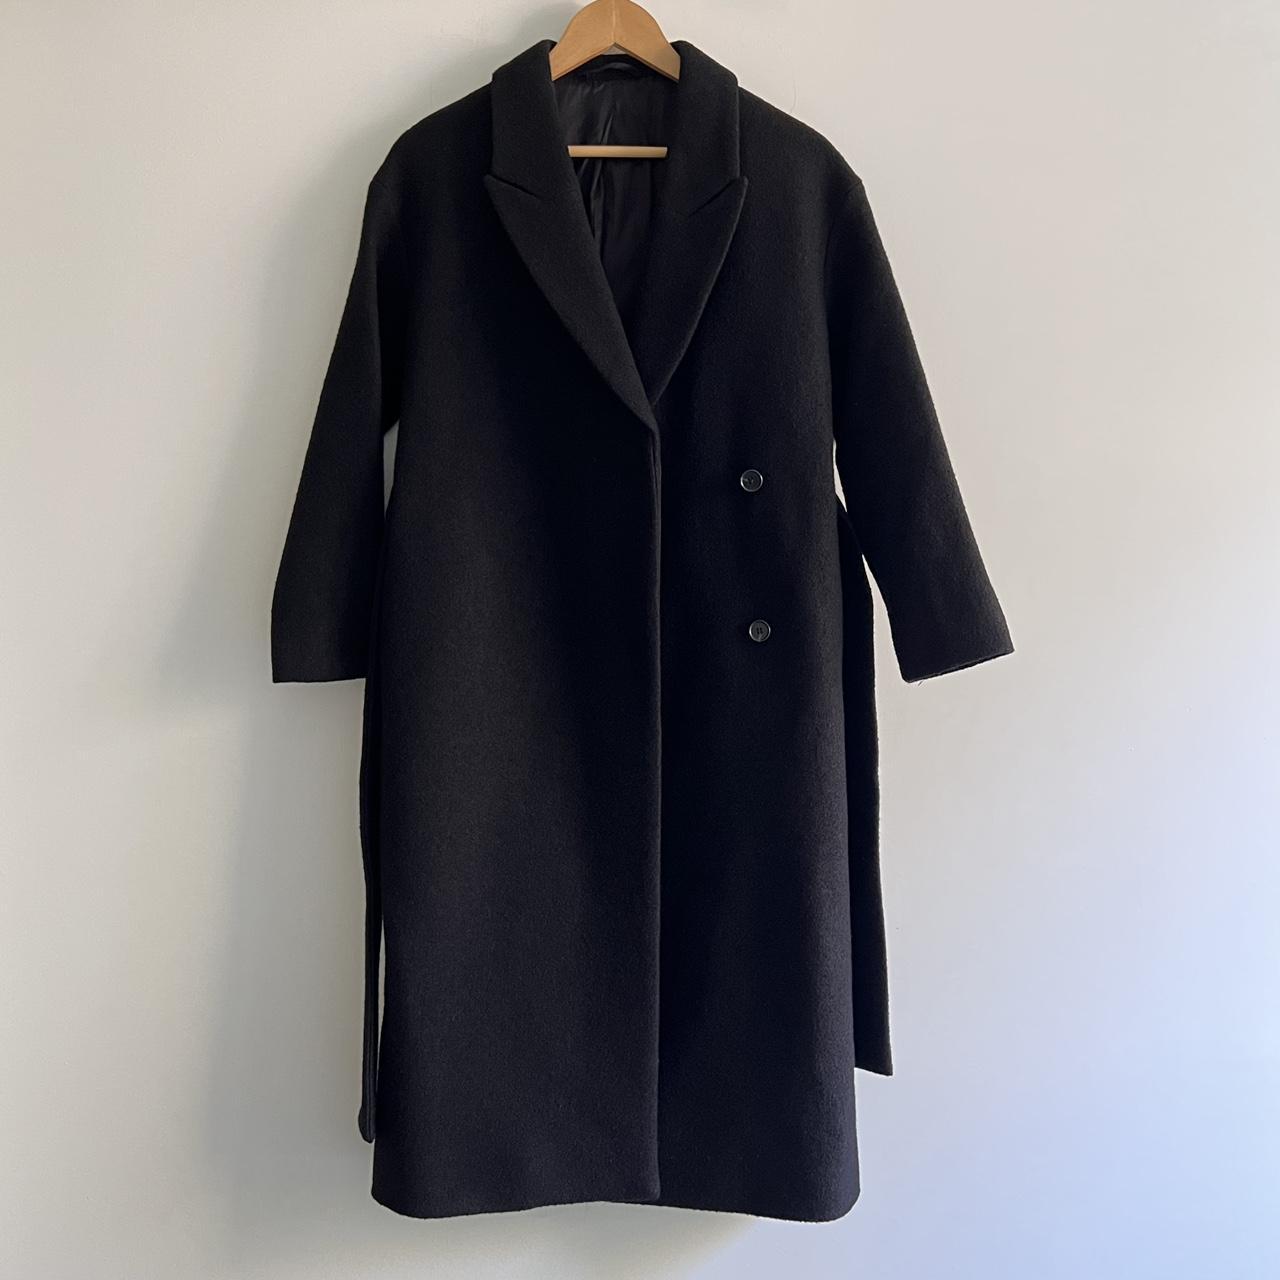 ON HOLD - COS 100% wool black belted coat Perfect... - Depop